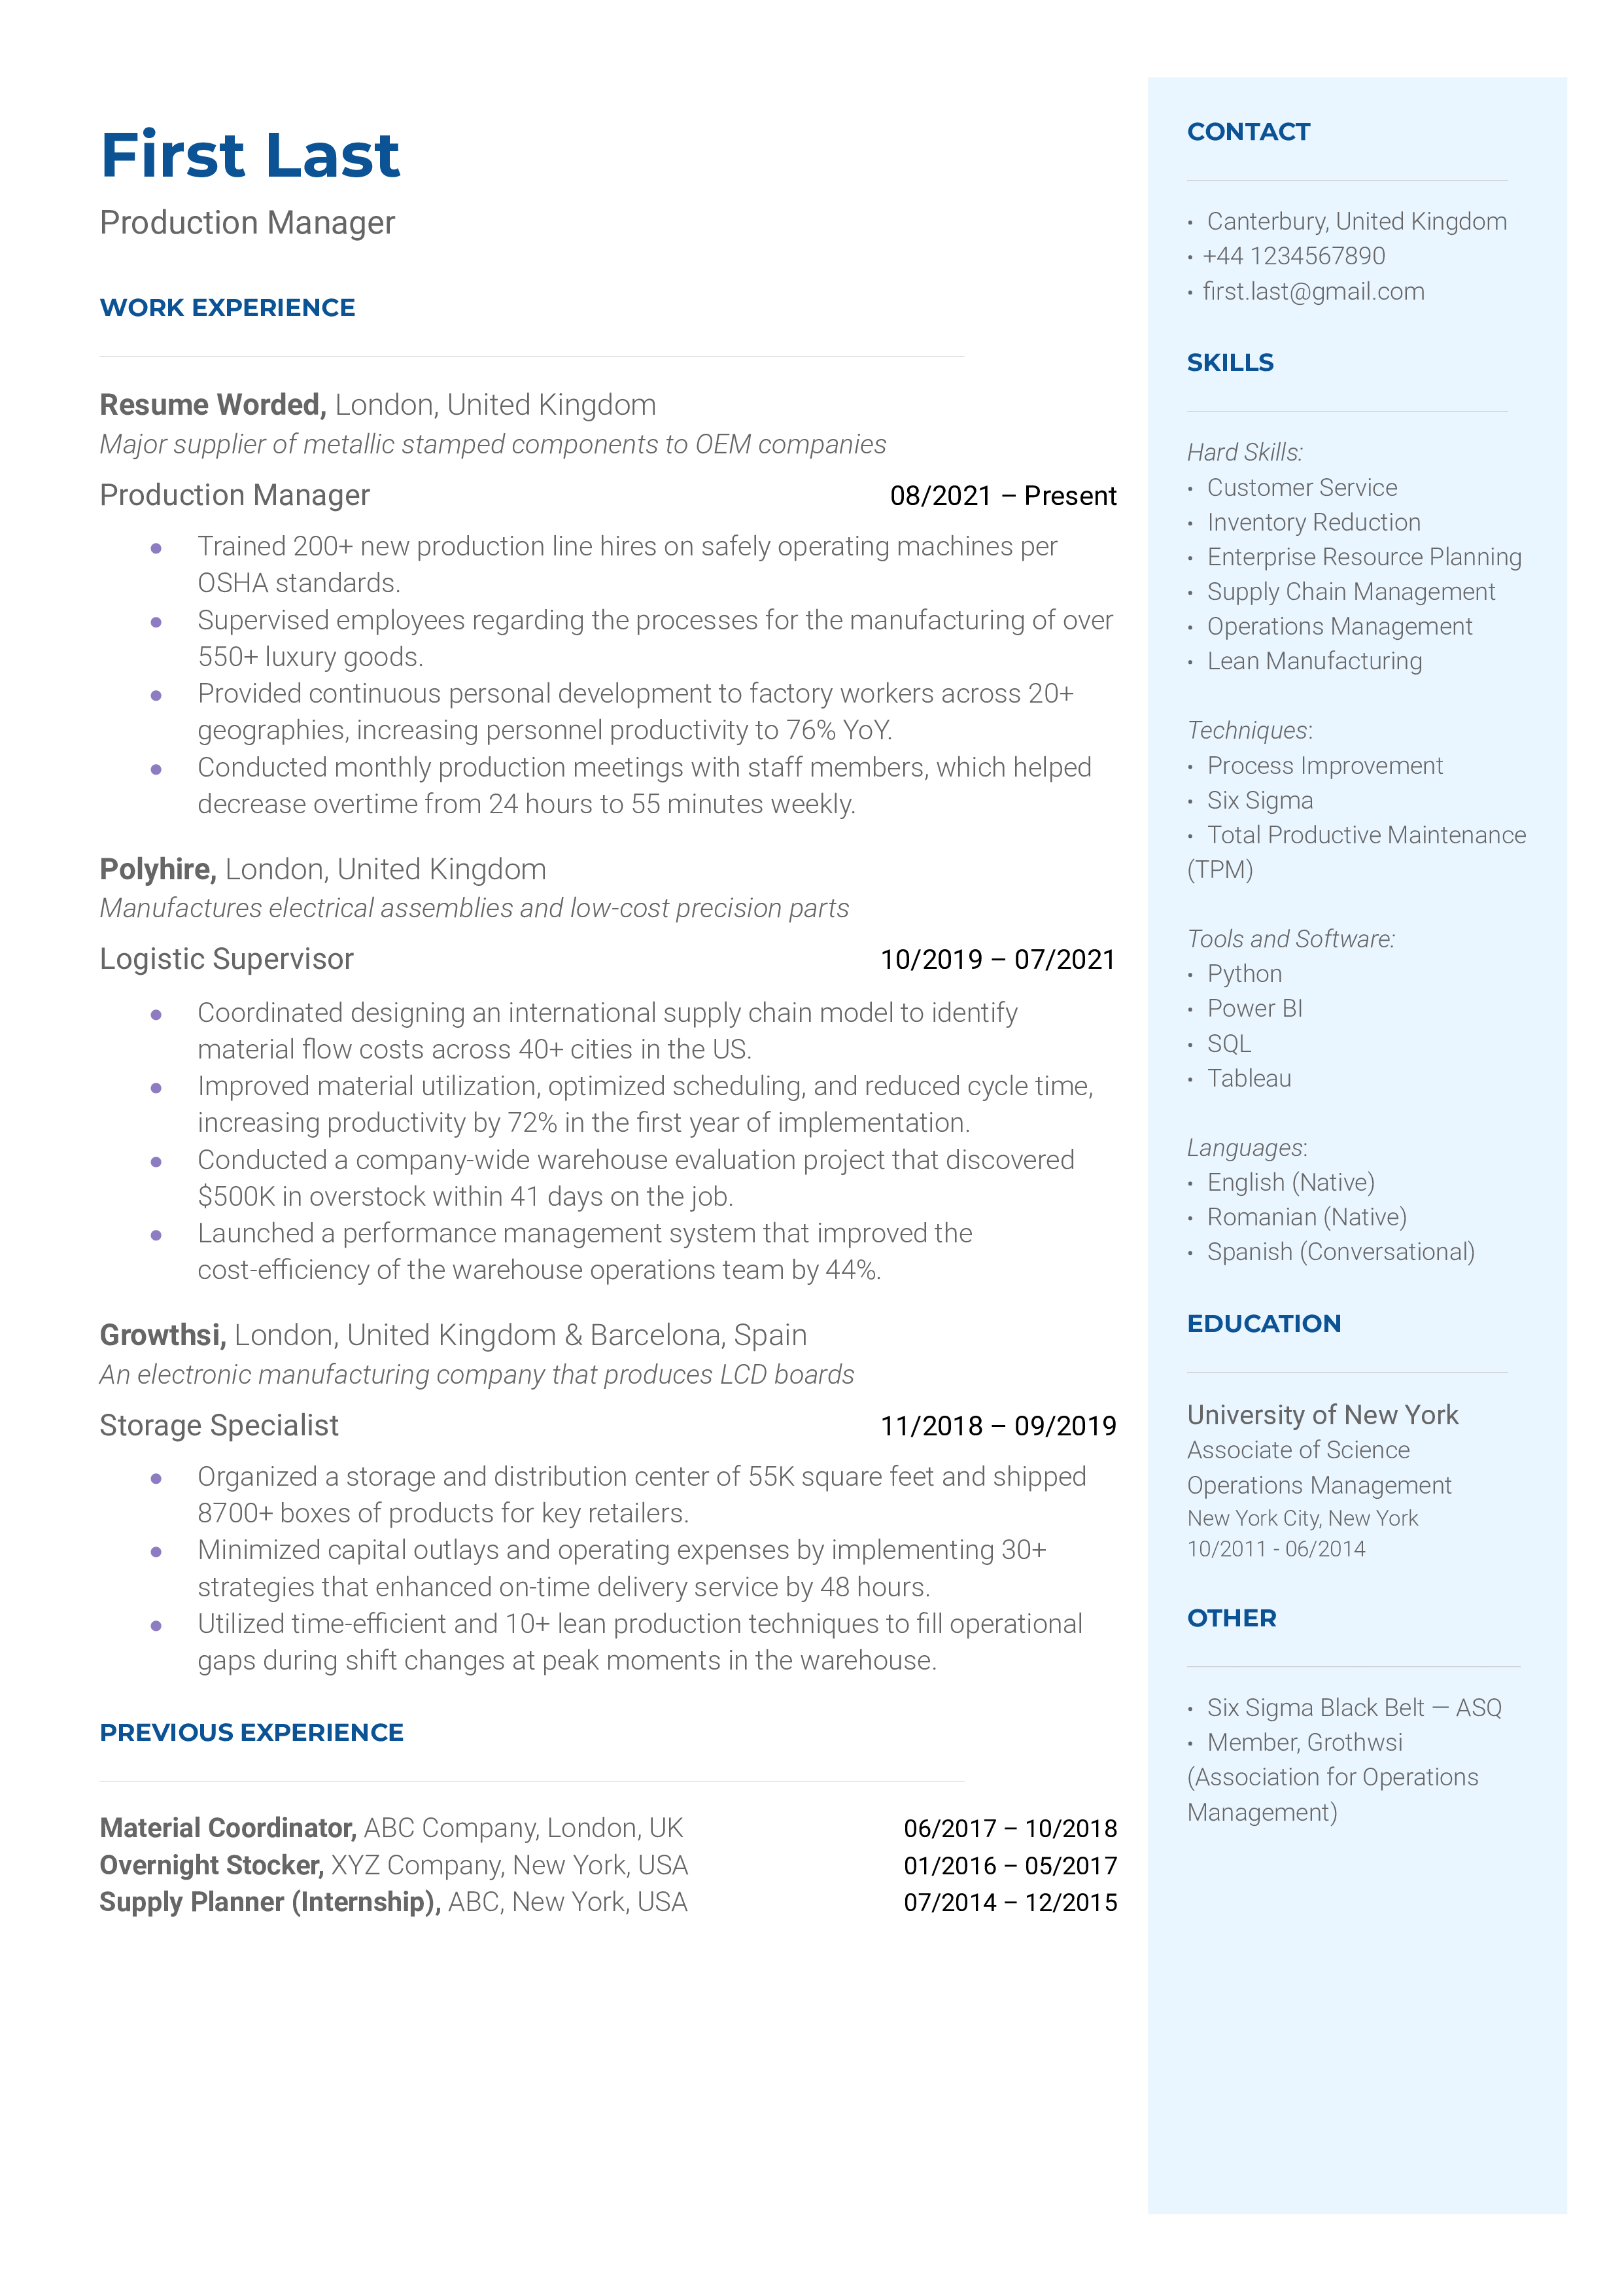 Production Manager resume showcasing experience and achievements